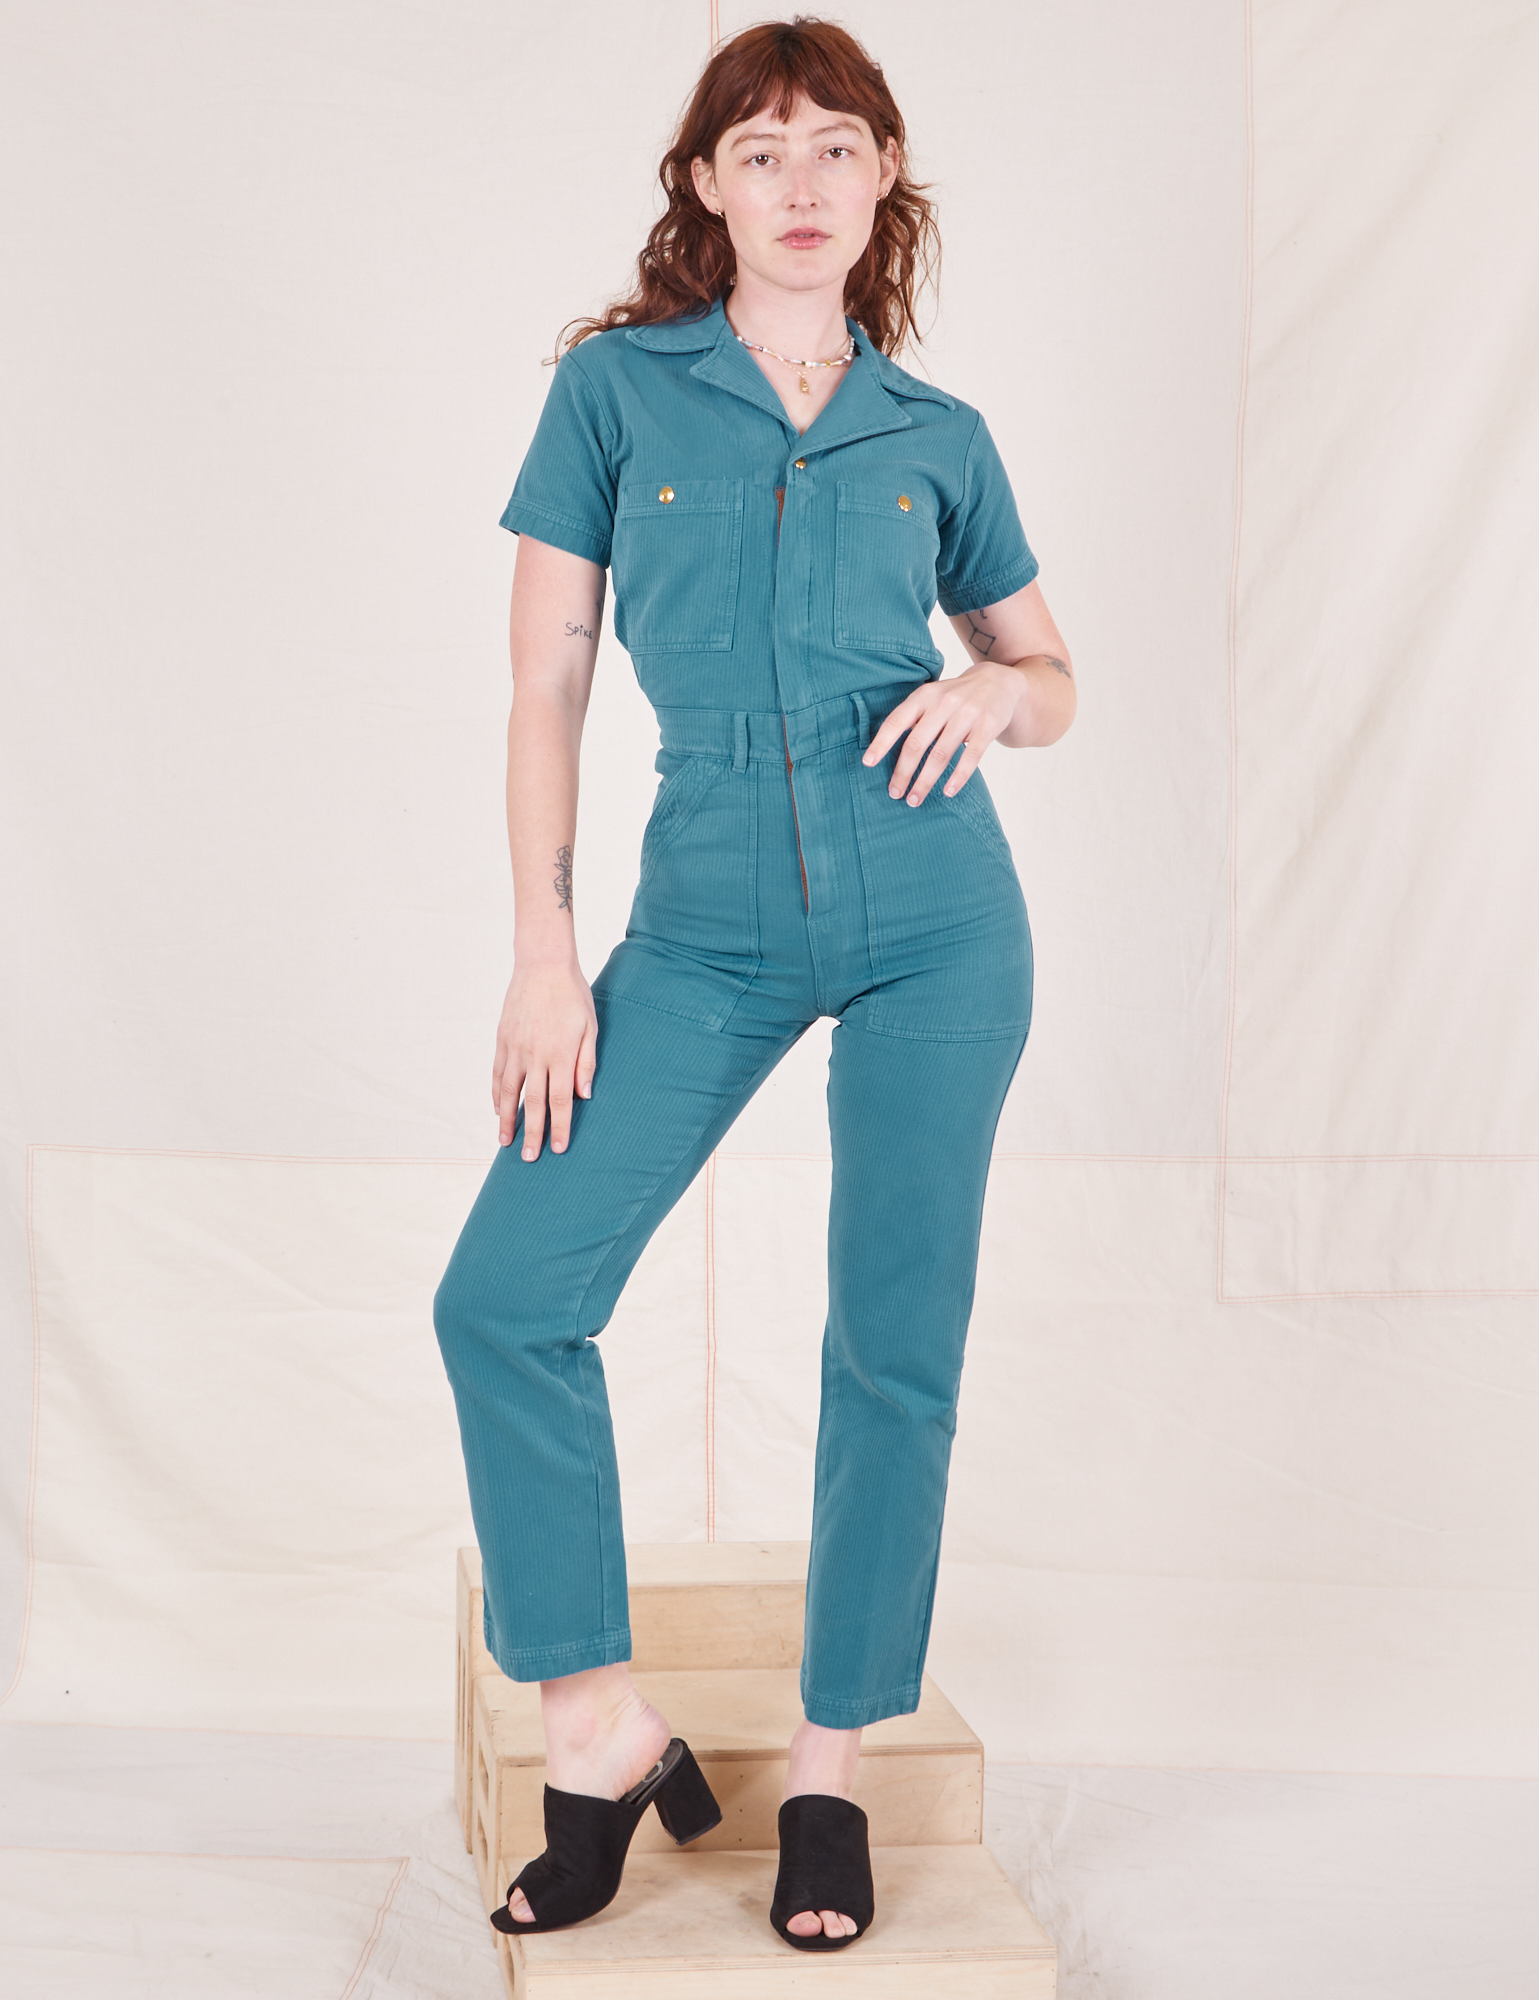 Alex is 5&#39;8&quot; and wearing size XS Heritage Short Sleeve Jumpsuit in Marine Blue